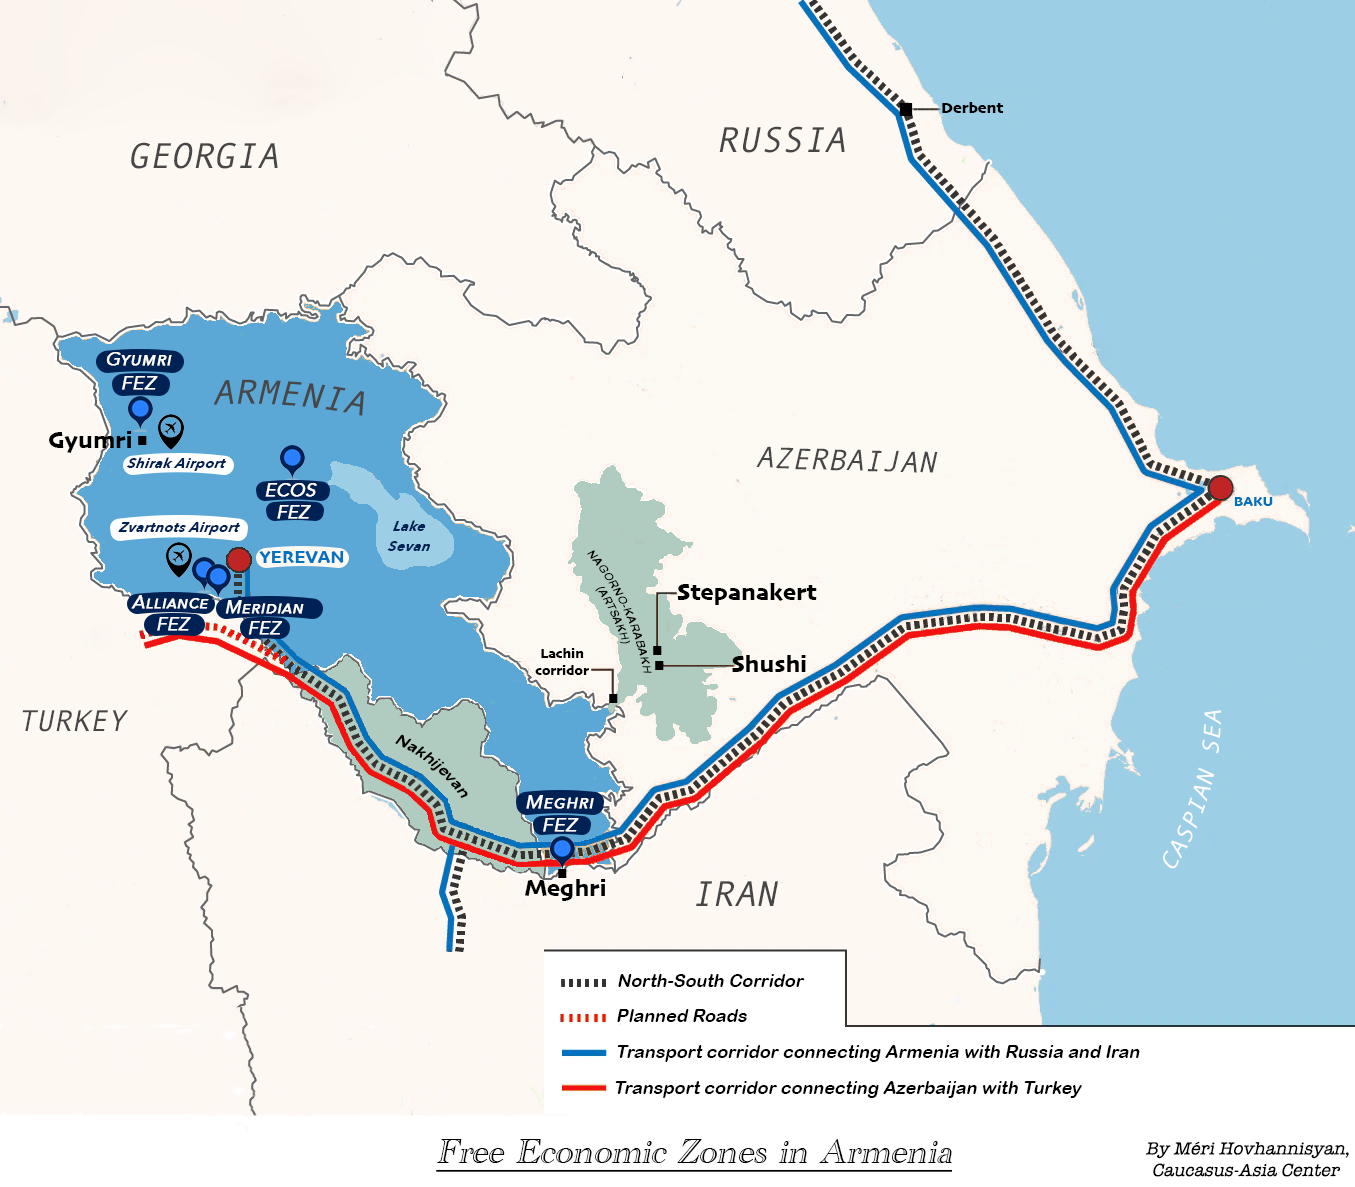 Free Economic Zones in Armenia : boundless opportunities in a “bounded country”